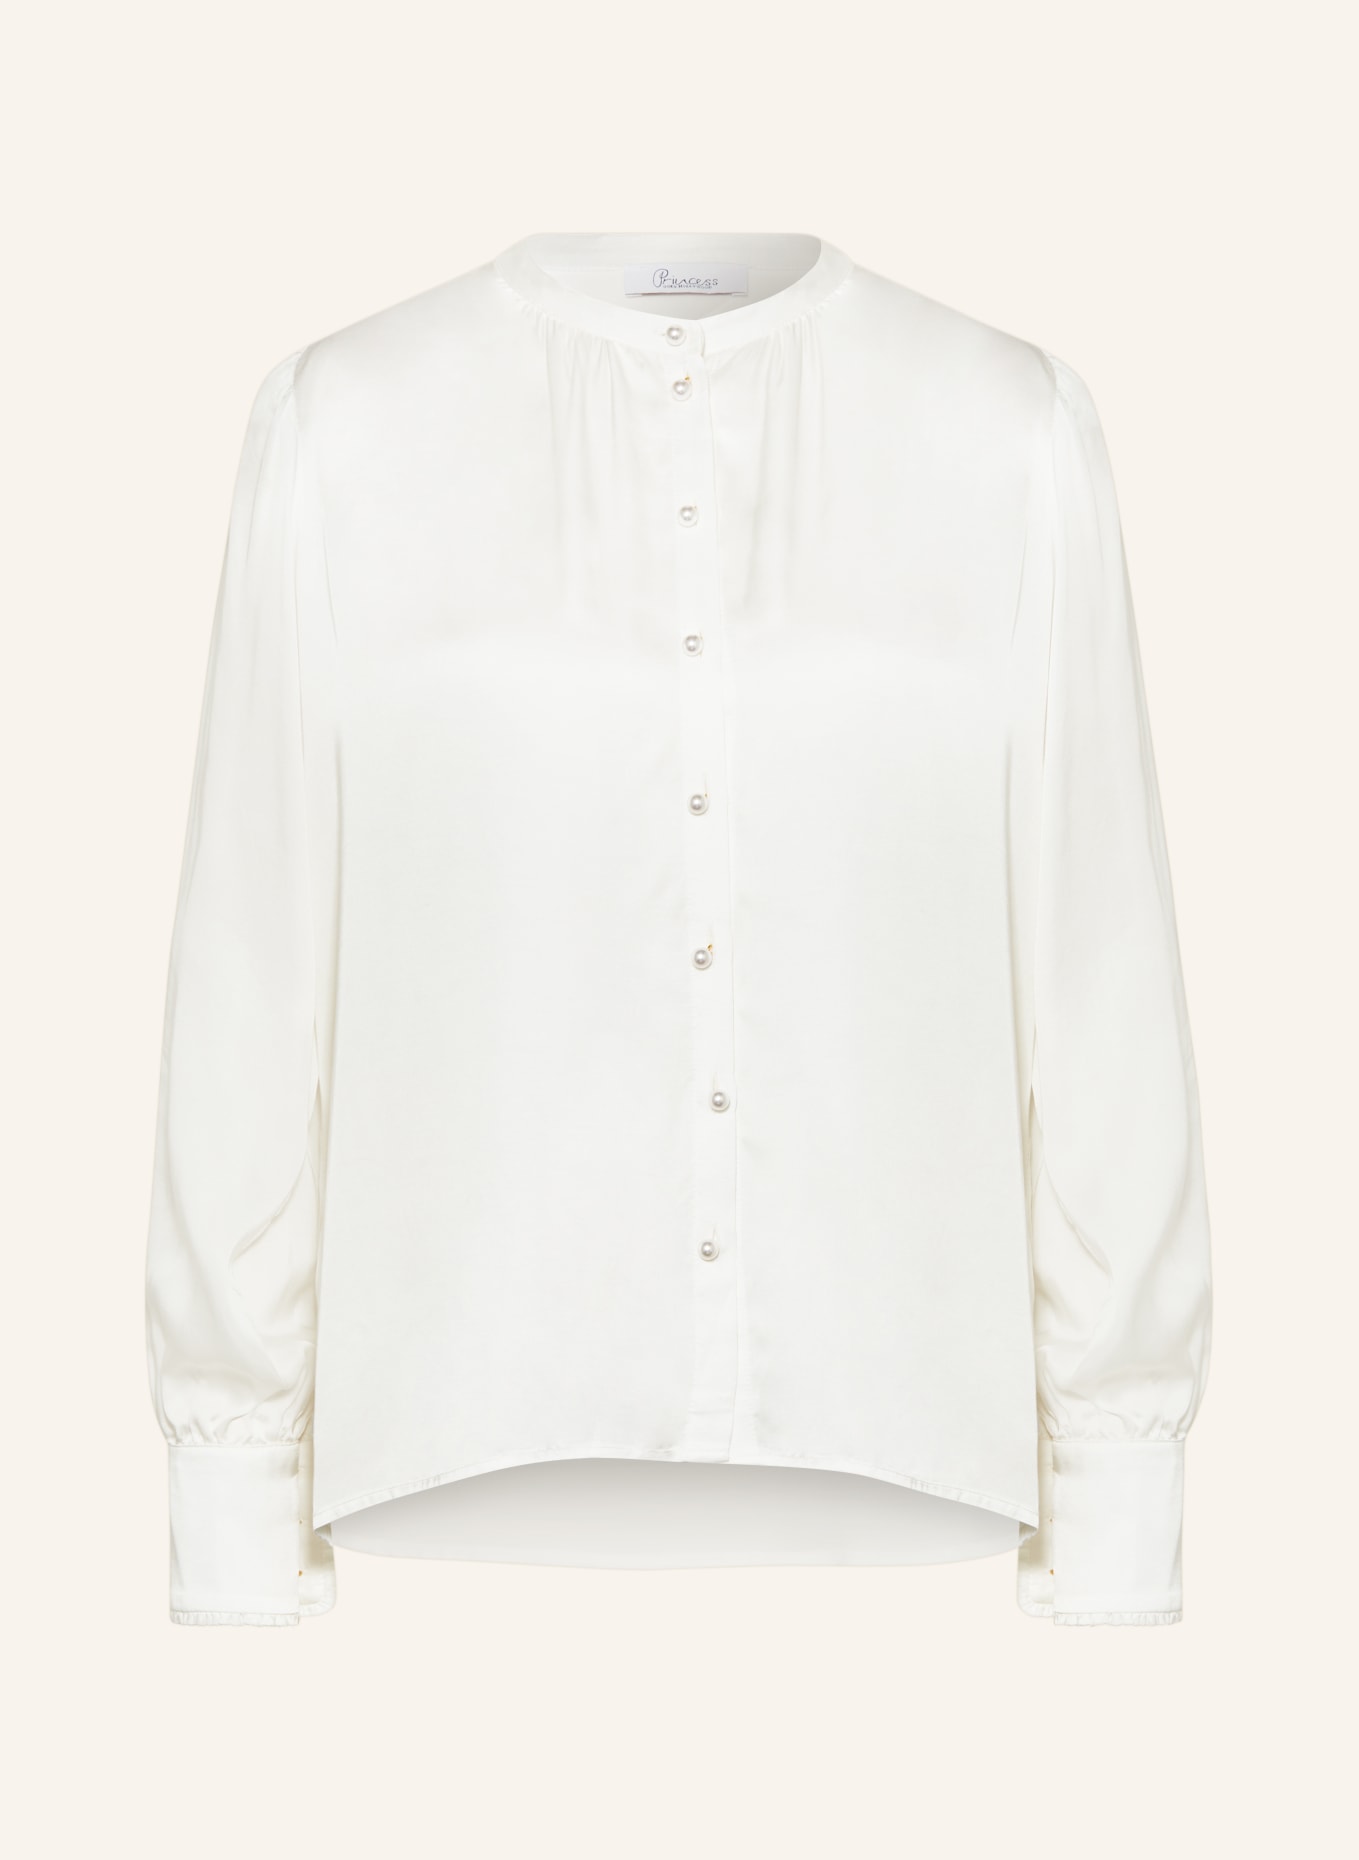 Princess GOES HOLLYWOOD Satin blouse with ruffles, Color: WHITE (Image 1)